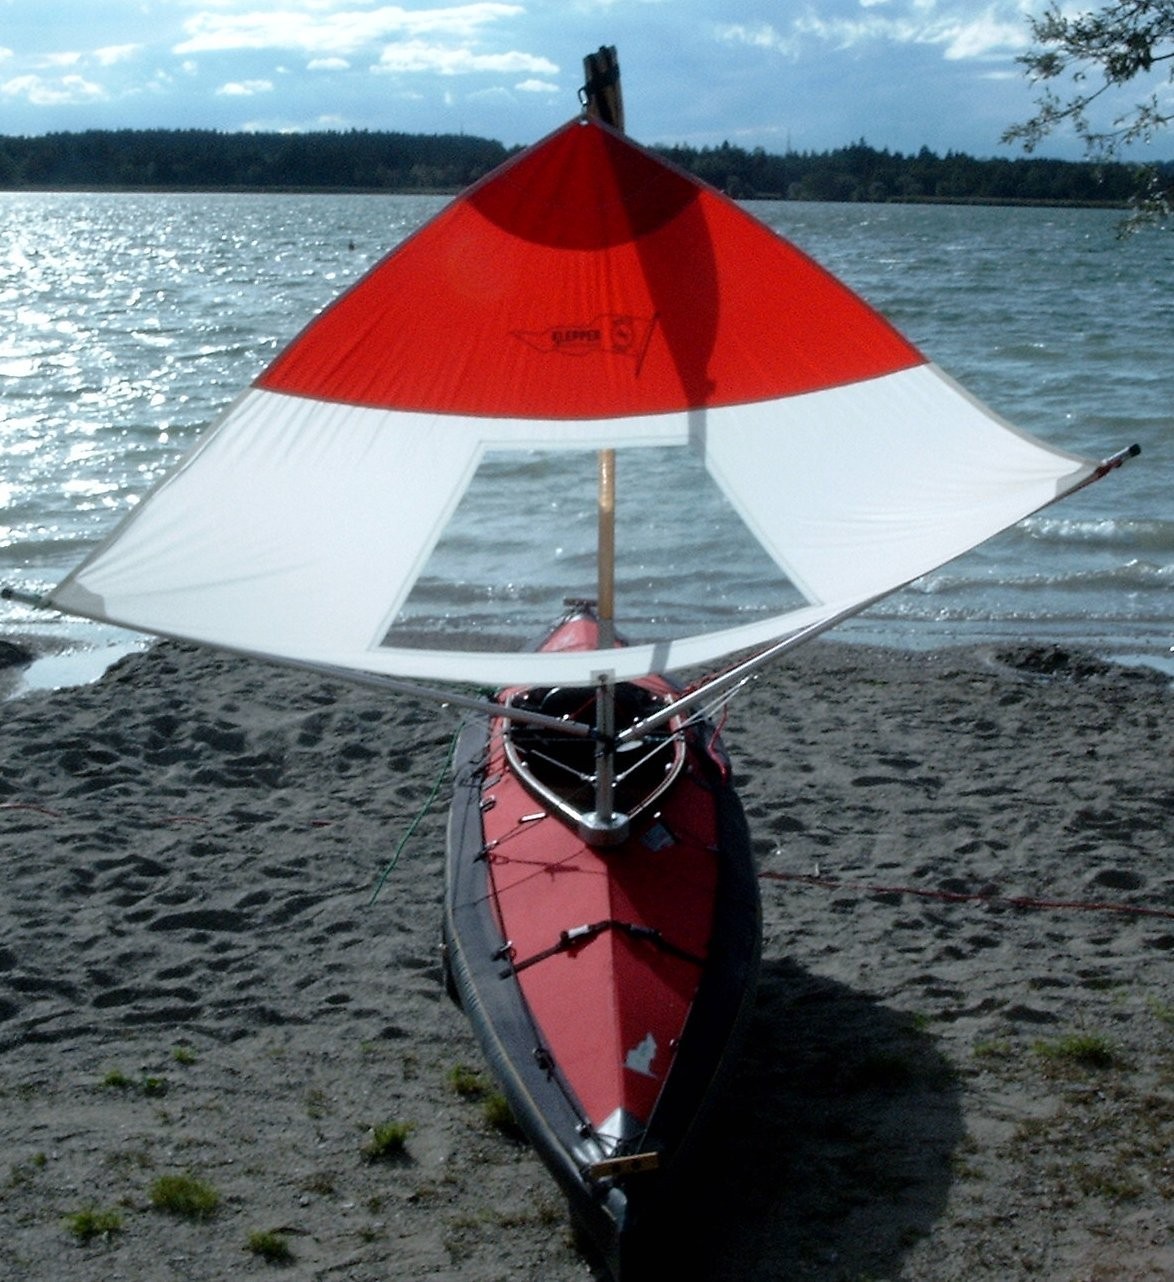 Driftsail "Freewind", white - red, including viewing window